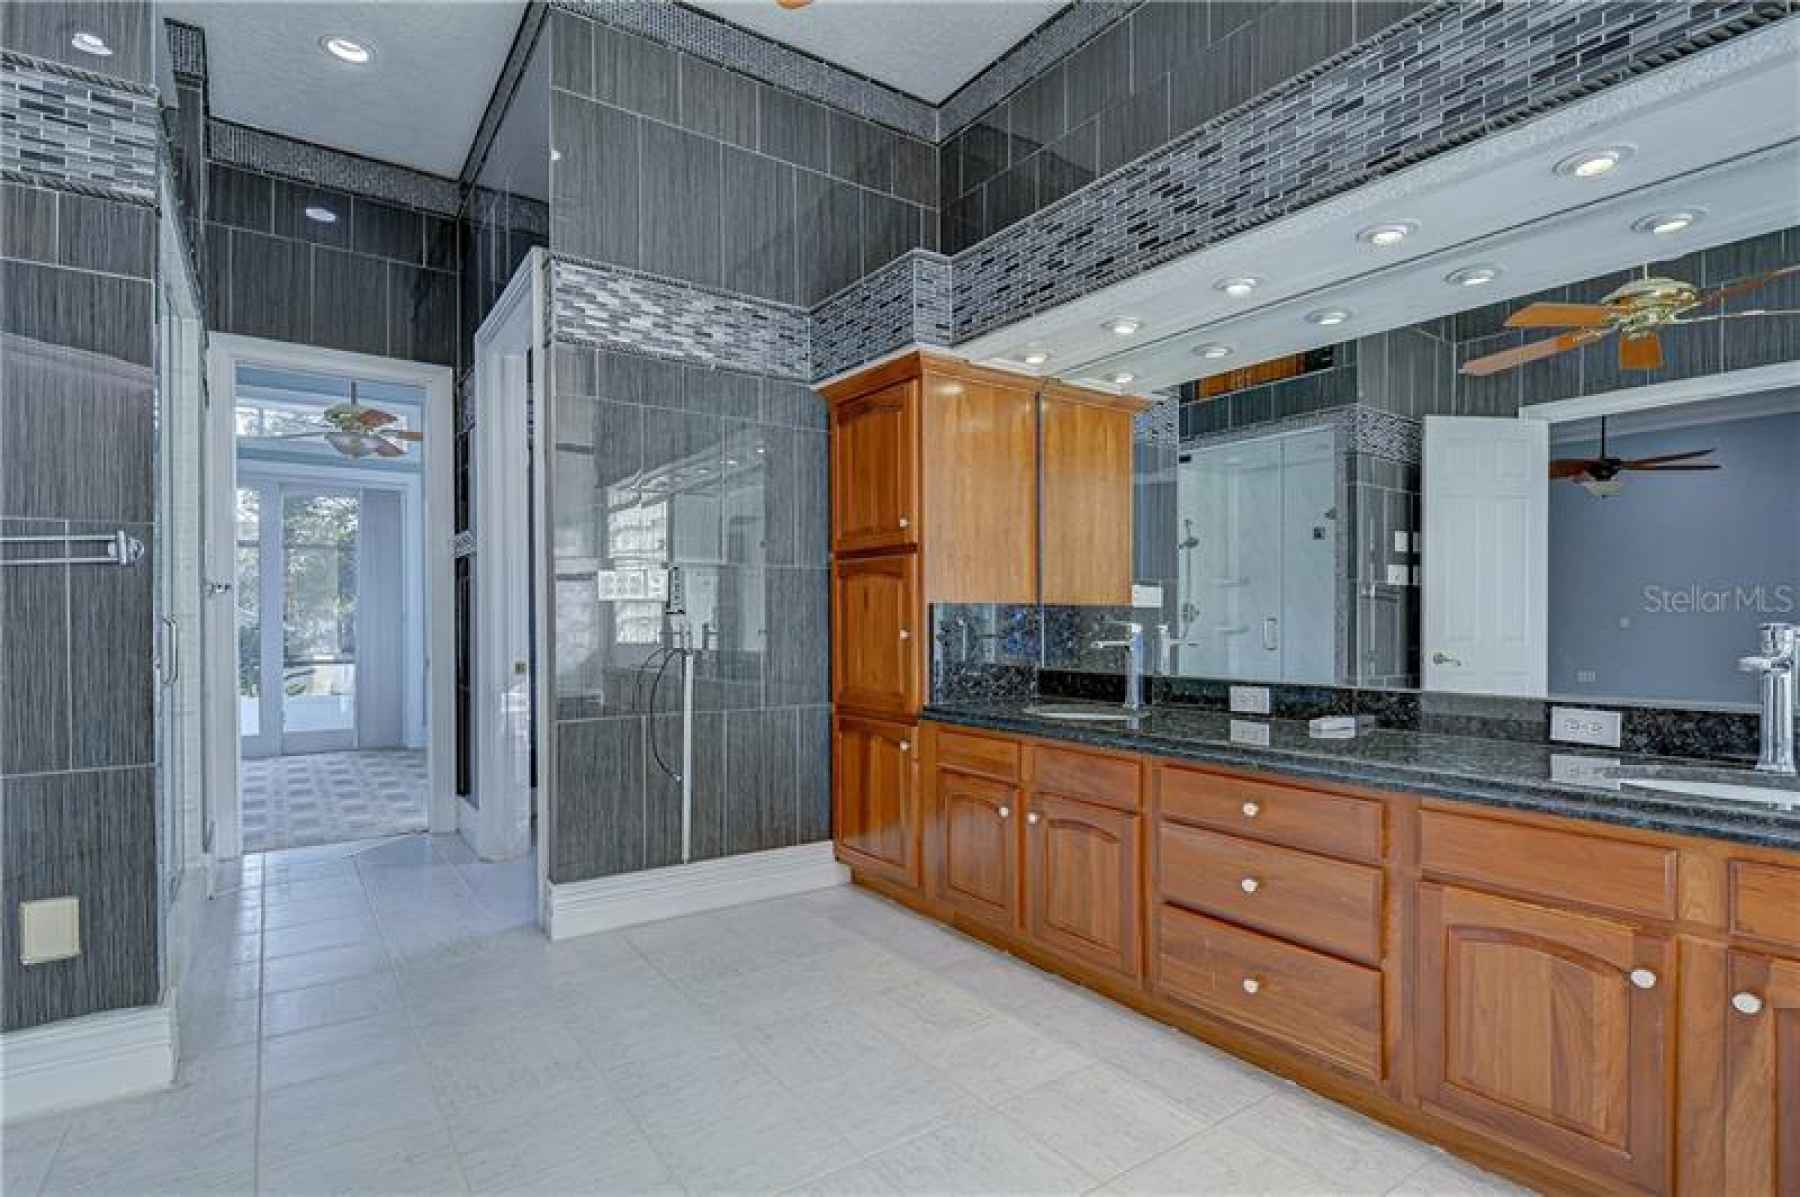 MAGNIFICENT tiling all around the master bath!